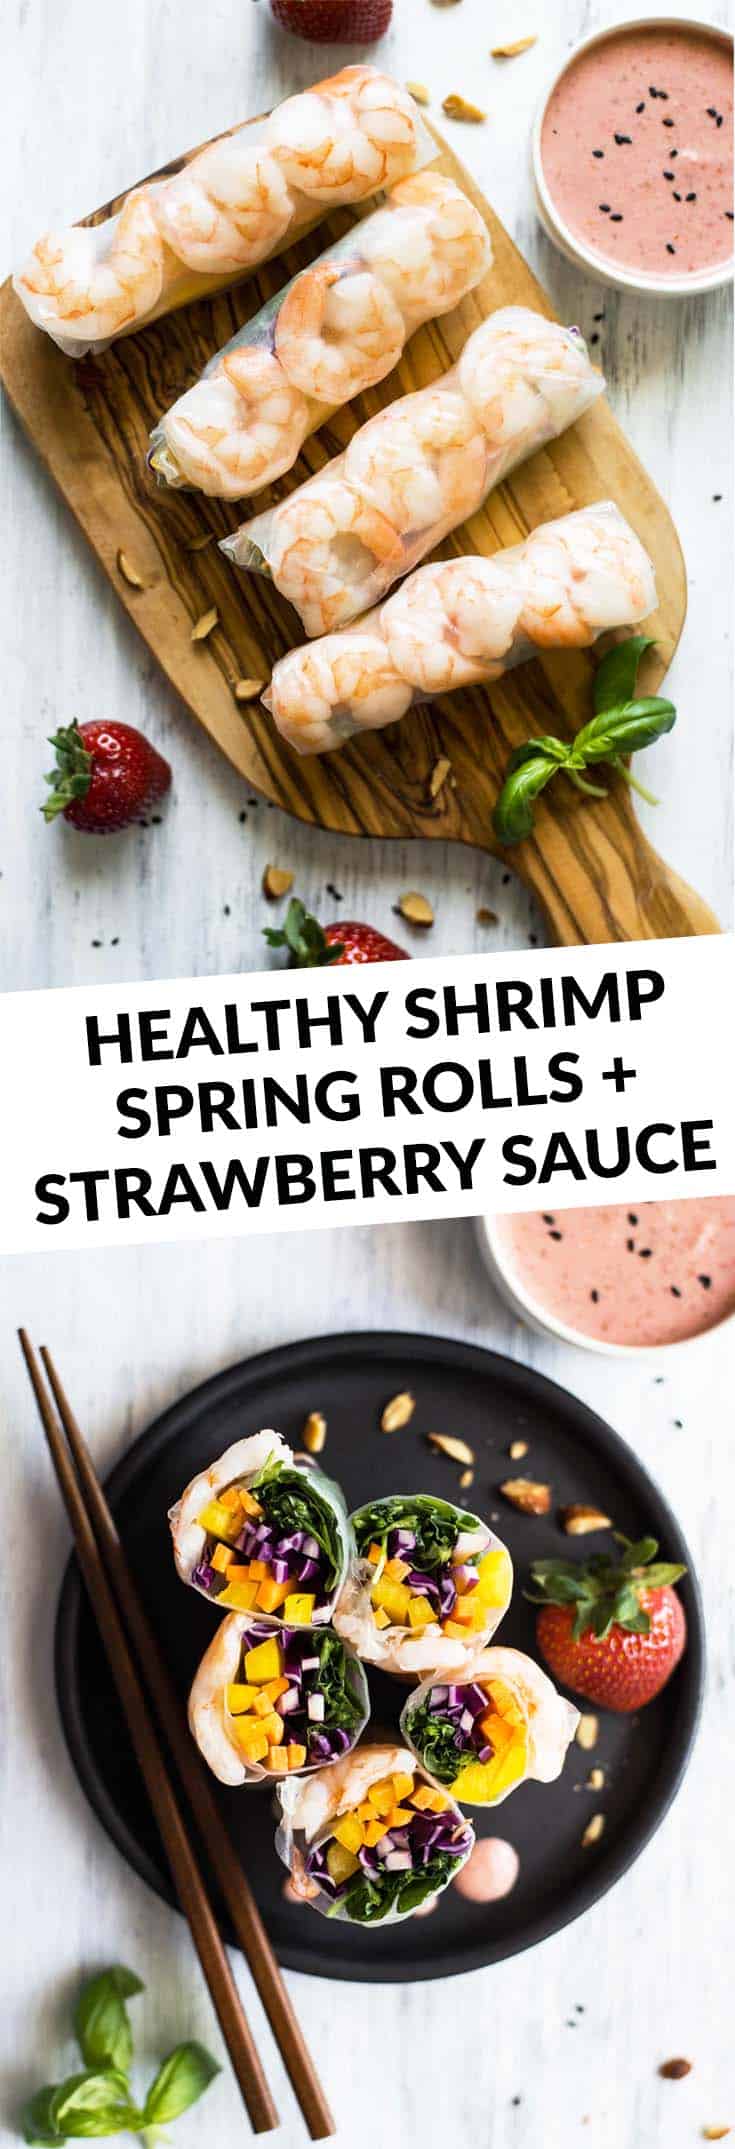 Shrimp Spring Rolls with Strawberry Almond Sauce - easy, healthy summer appetizer ready in 30 minutes! by @healthynibs